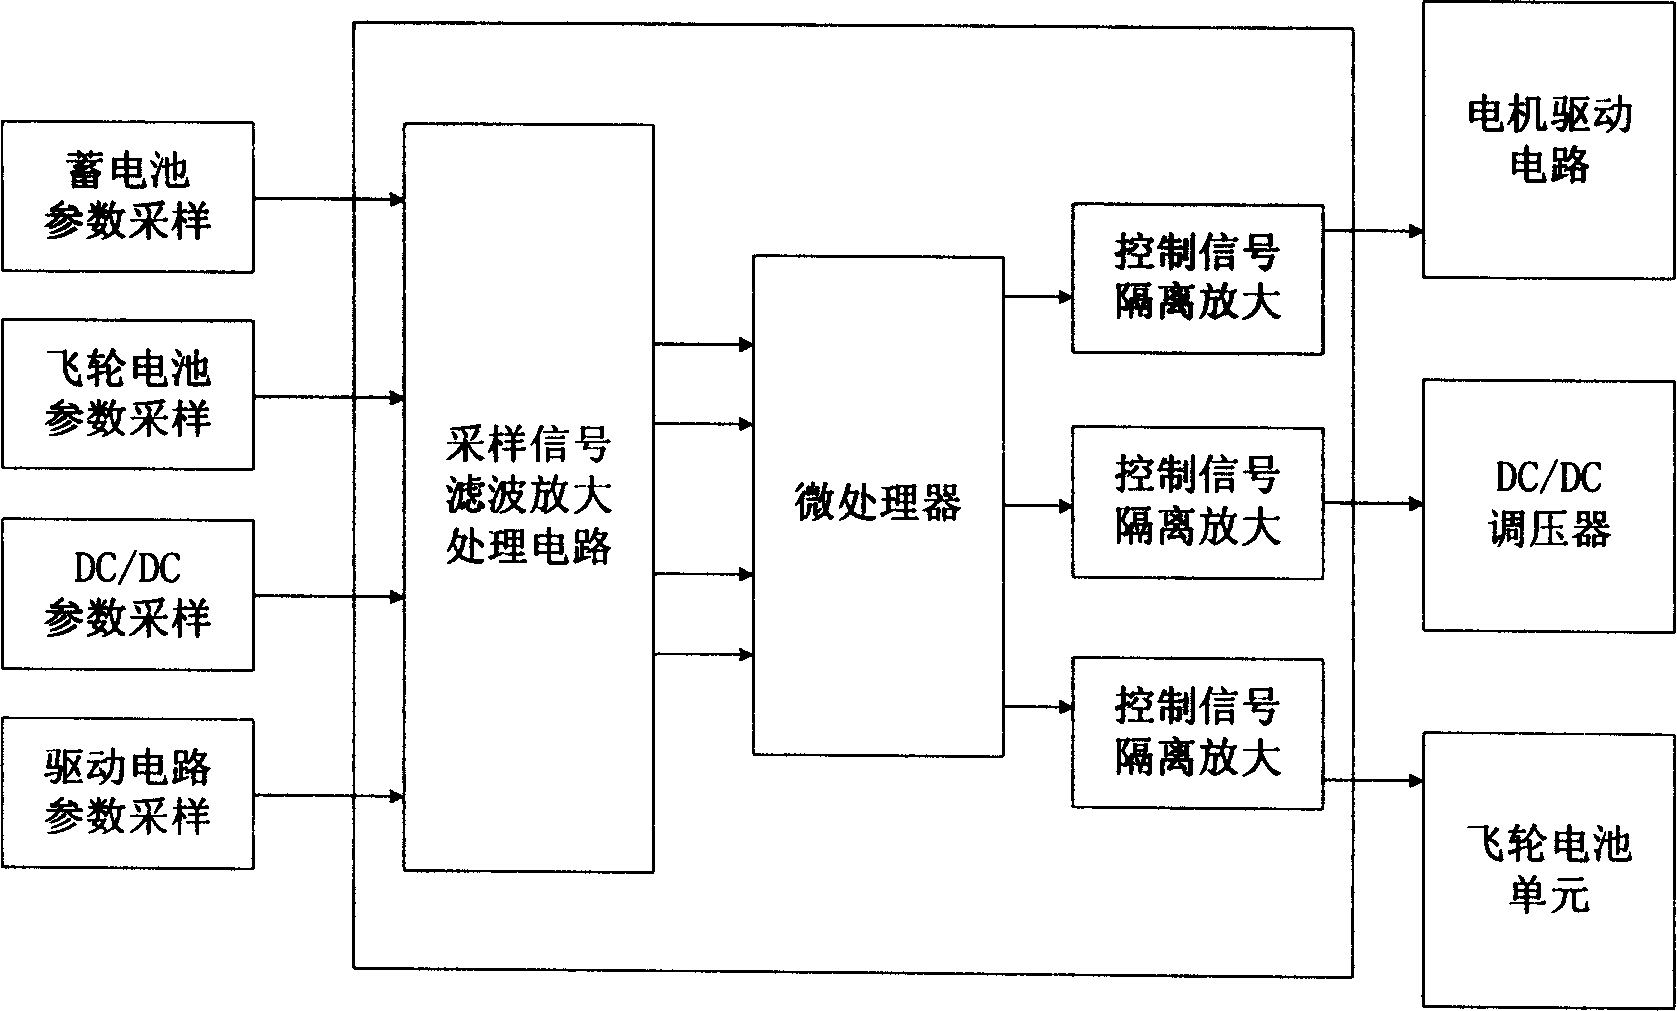 Construction method for electric car flying wheel battery auxiliary power system